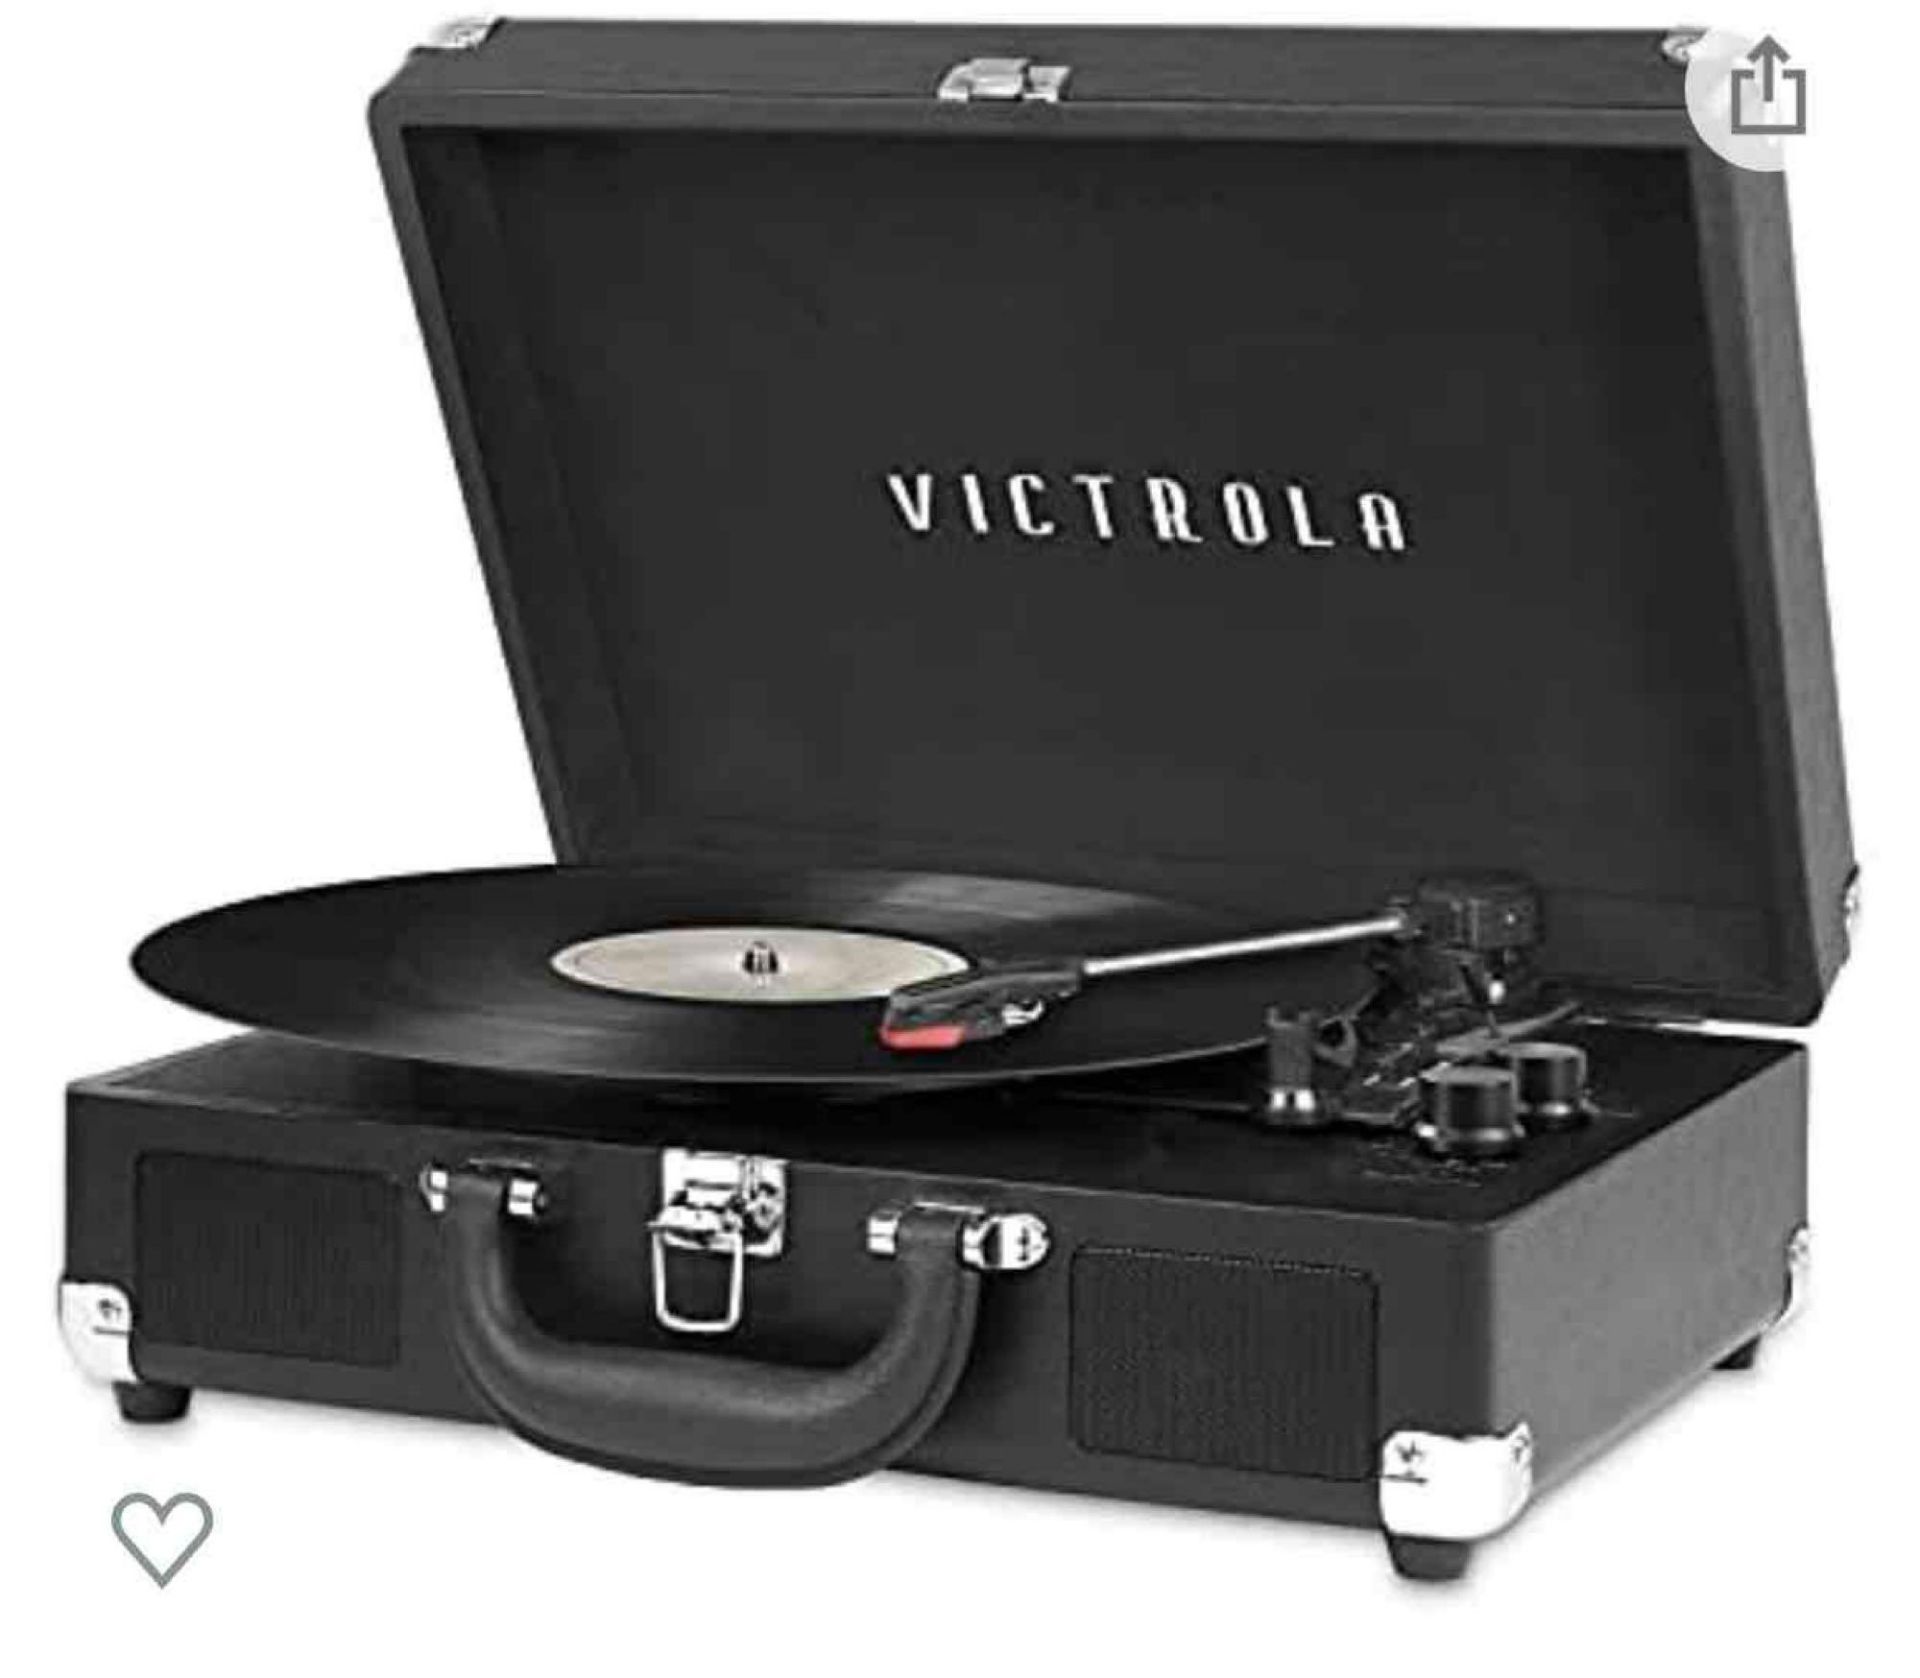 (Jb) RRP £95 Lot To Contain 1 Boxed Victrola Bluetooth 3 Speed Turntable With Stereo Speakers And Au - Image 3 of 3